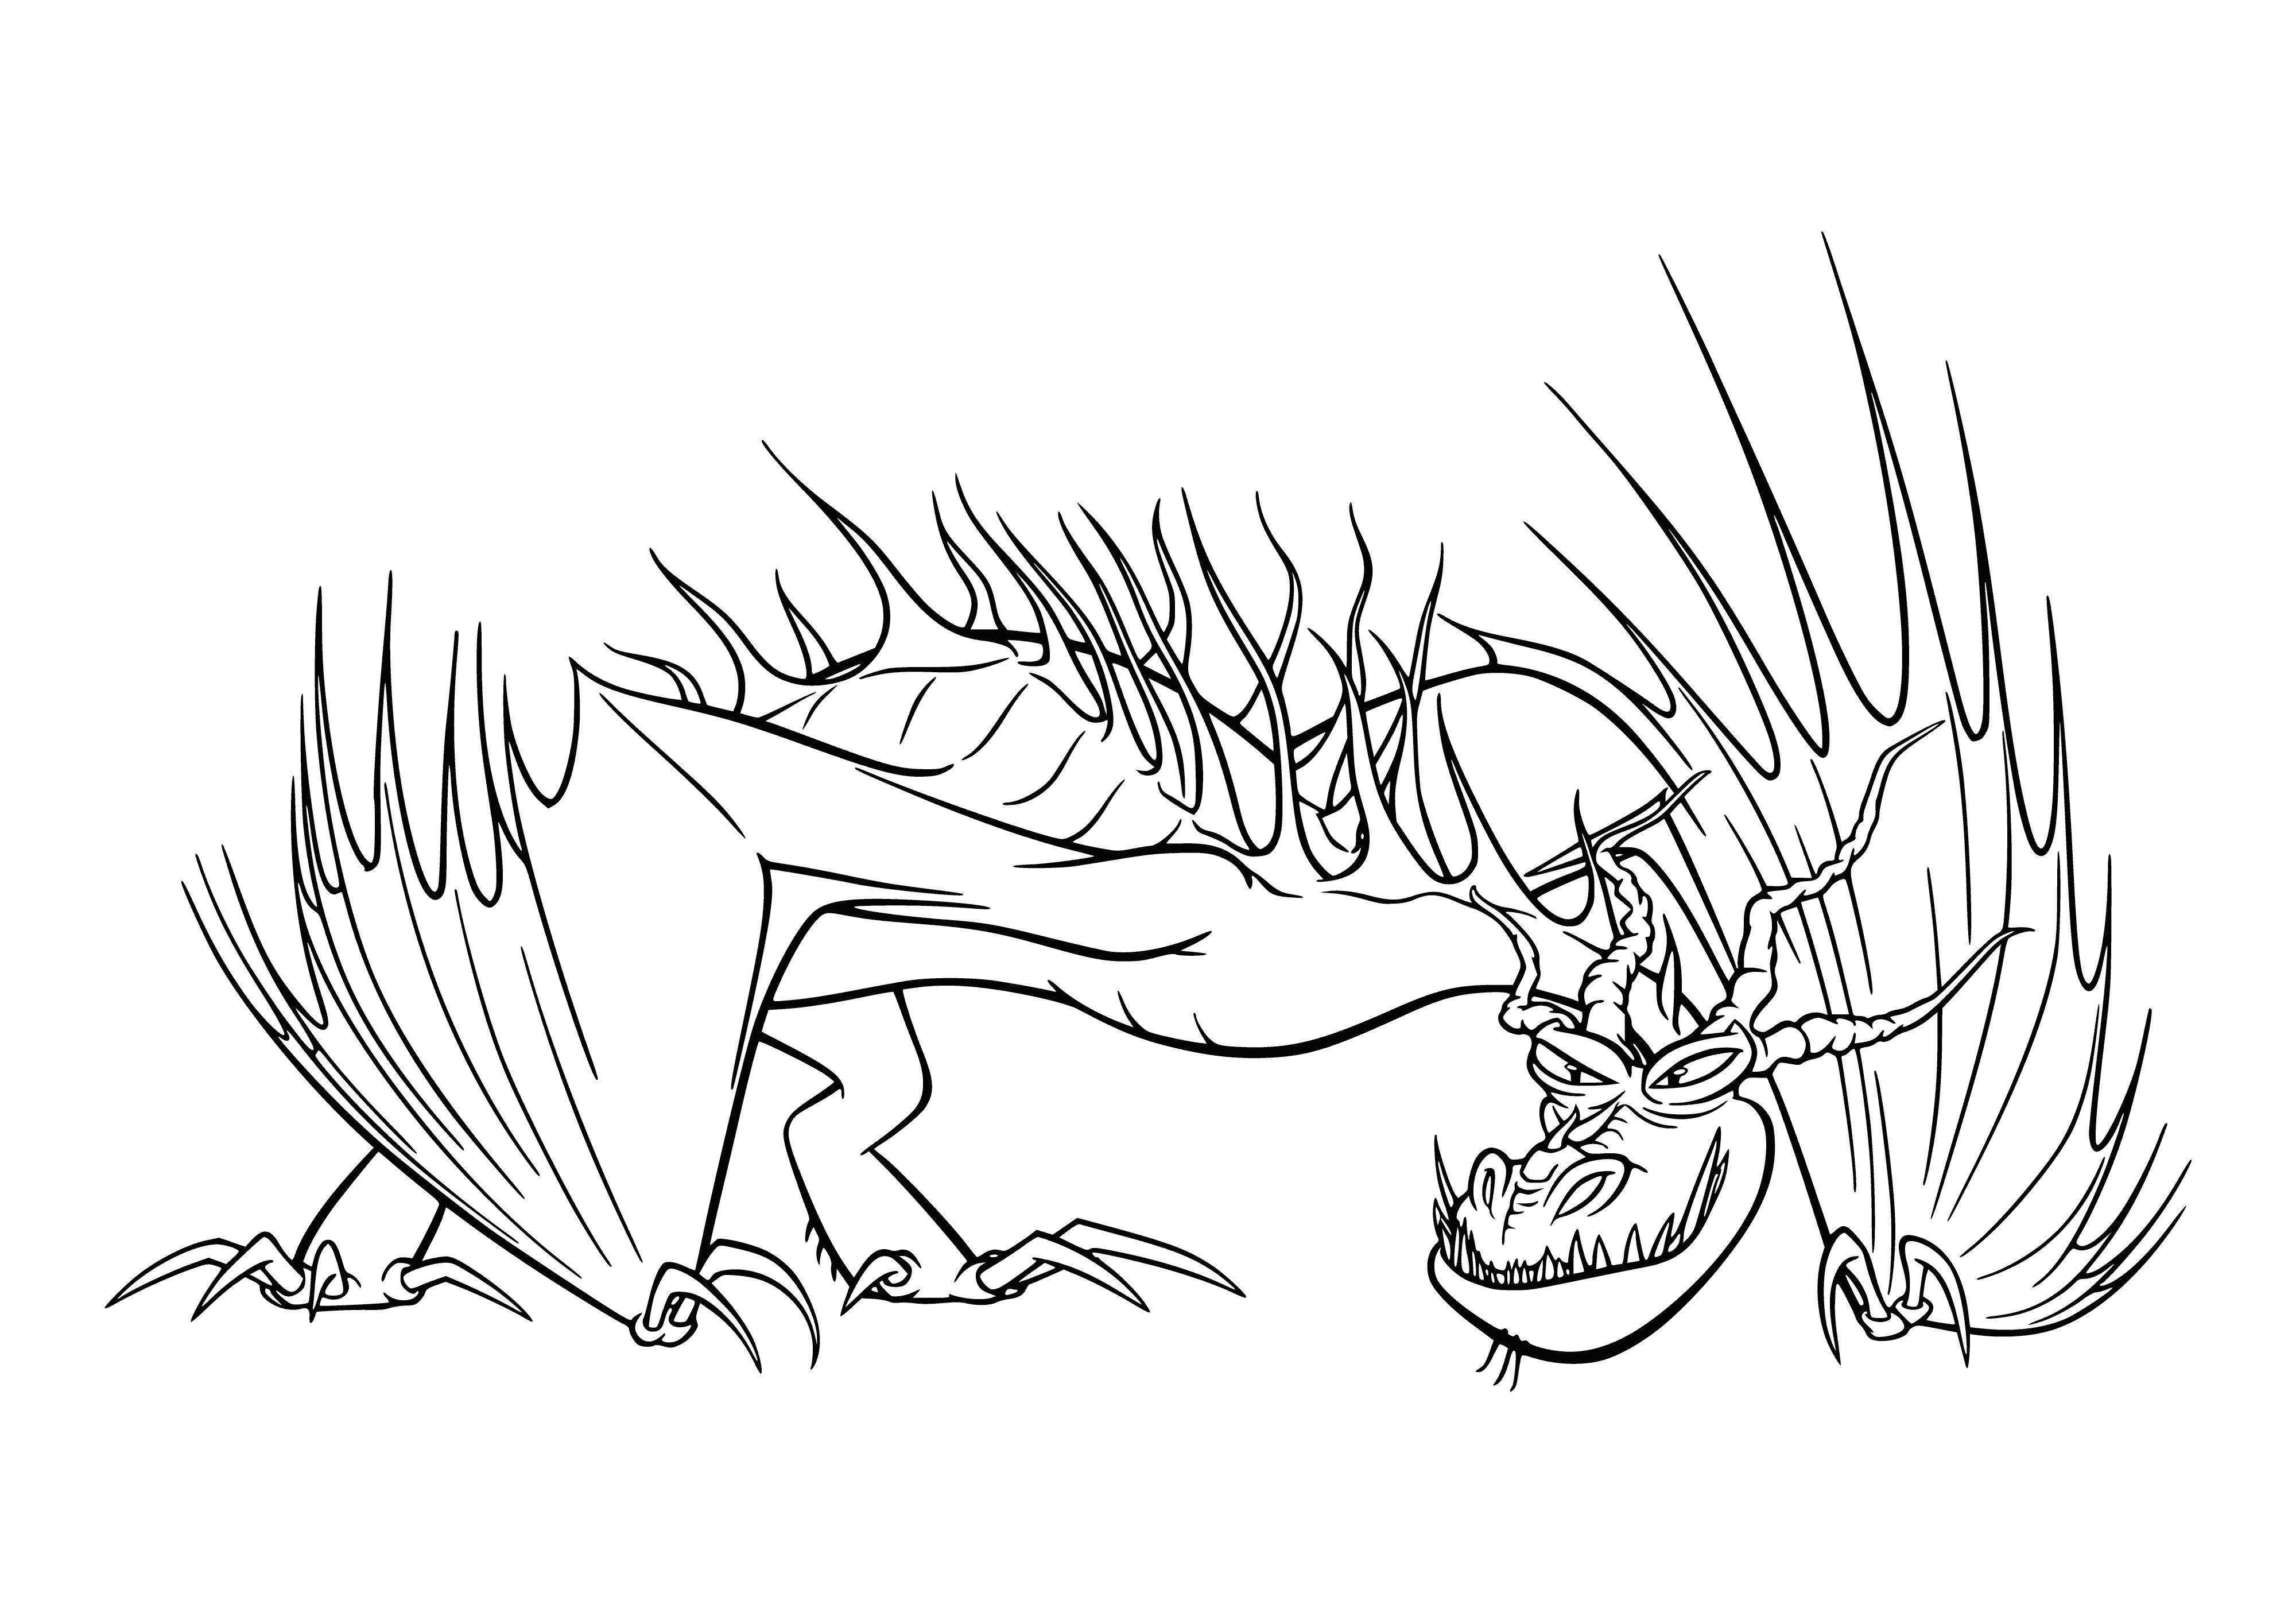 coloring page: Large dragon-like creature with long, snake-like body, dark blue skin, webbed wings, spikes, long & thin tail, sharp teeth, & extended claws flying through the air.